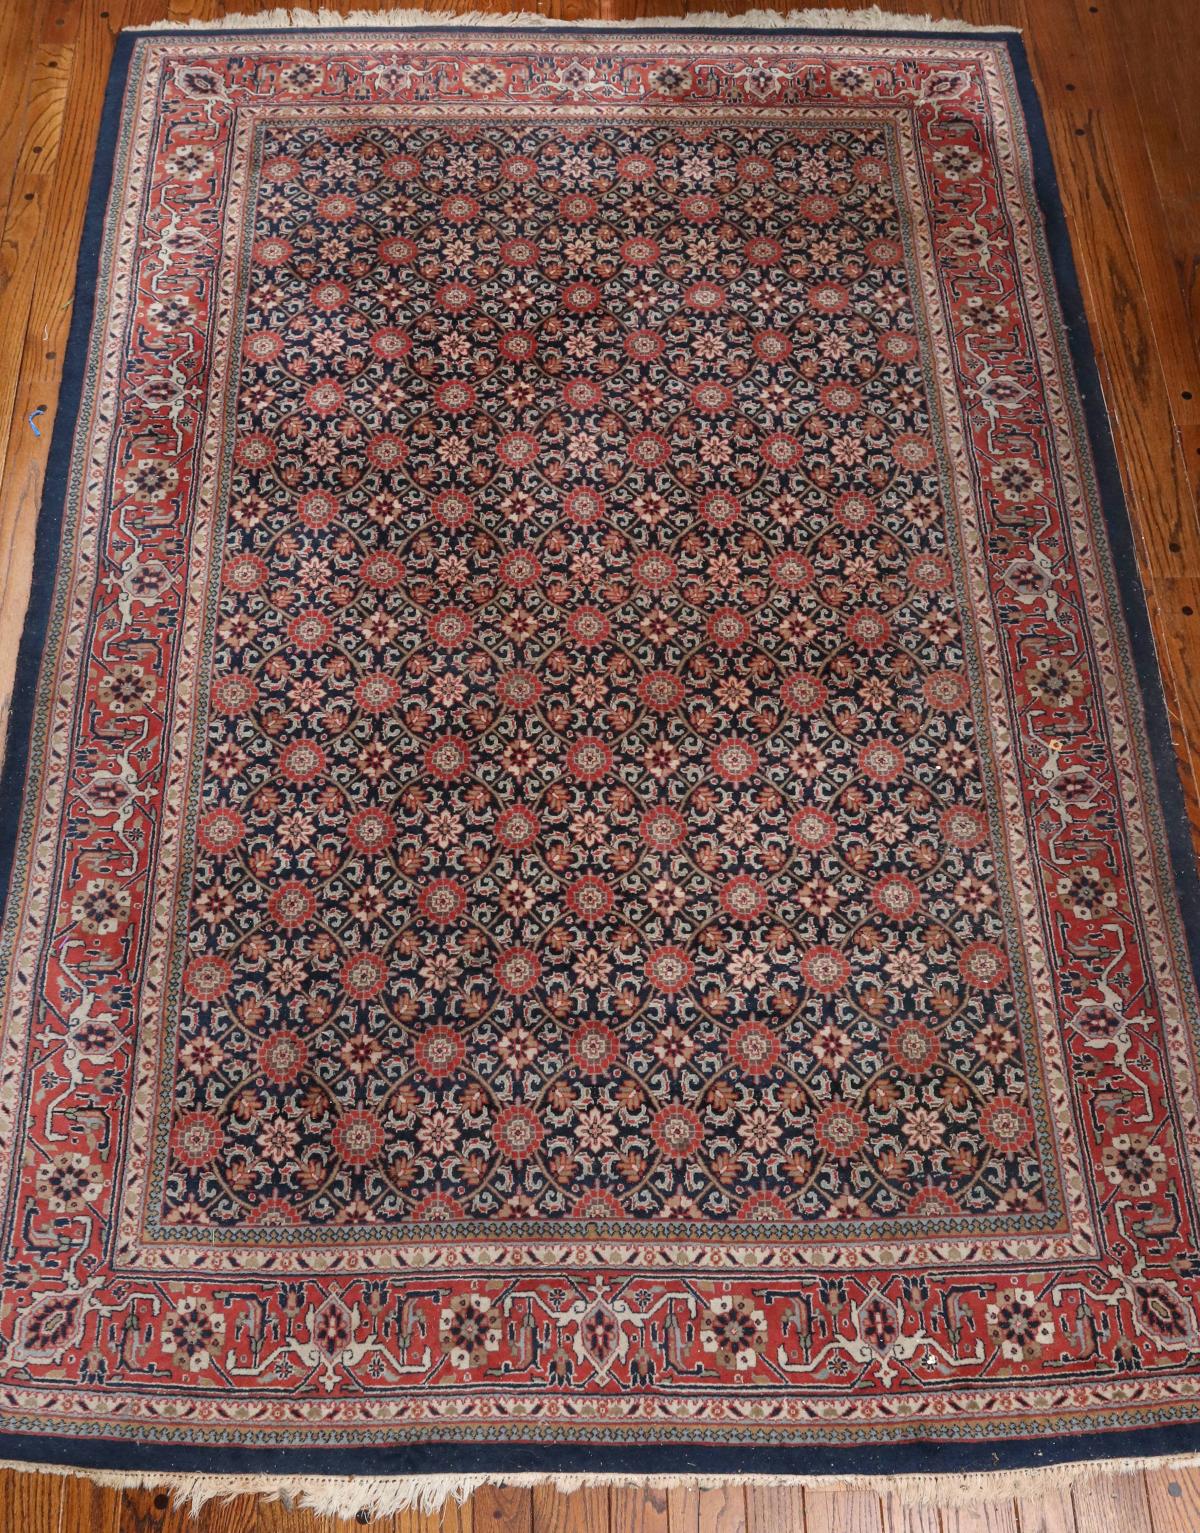 A LATE 20TH C. HAND MADE INDO PERSIAN CARPET